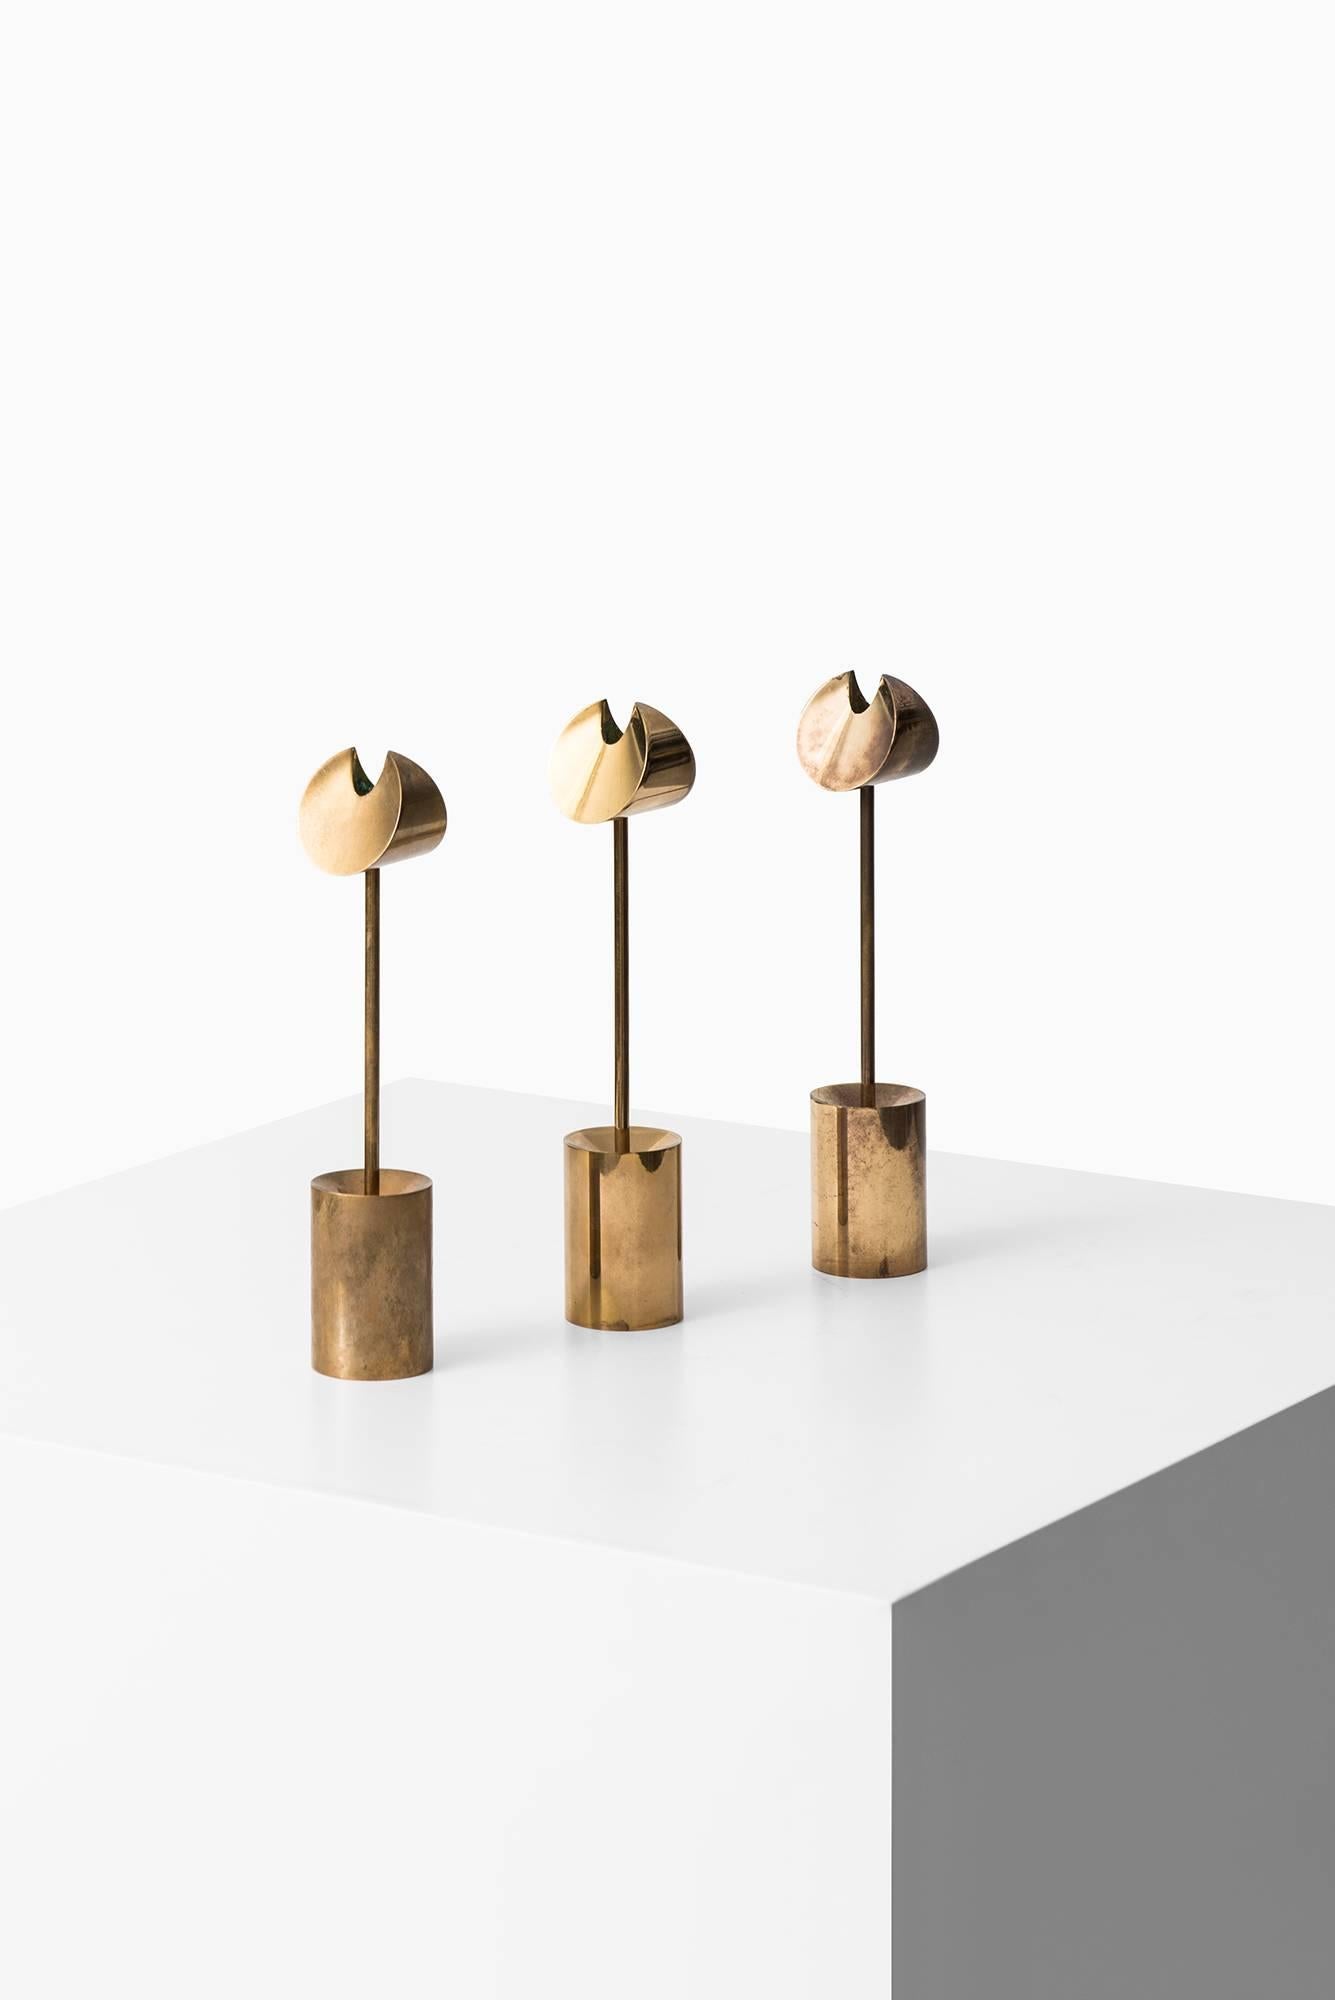 Candlesticks in brass designed by Pierre Forsell. Produced by Skultuna in Sweden.